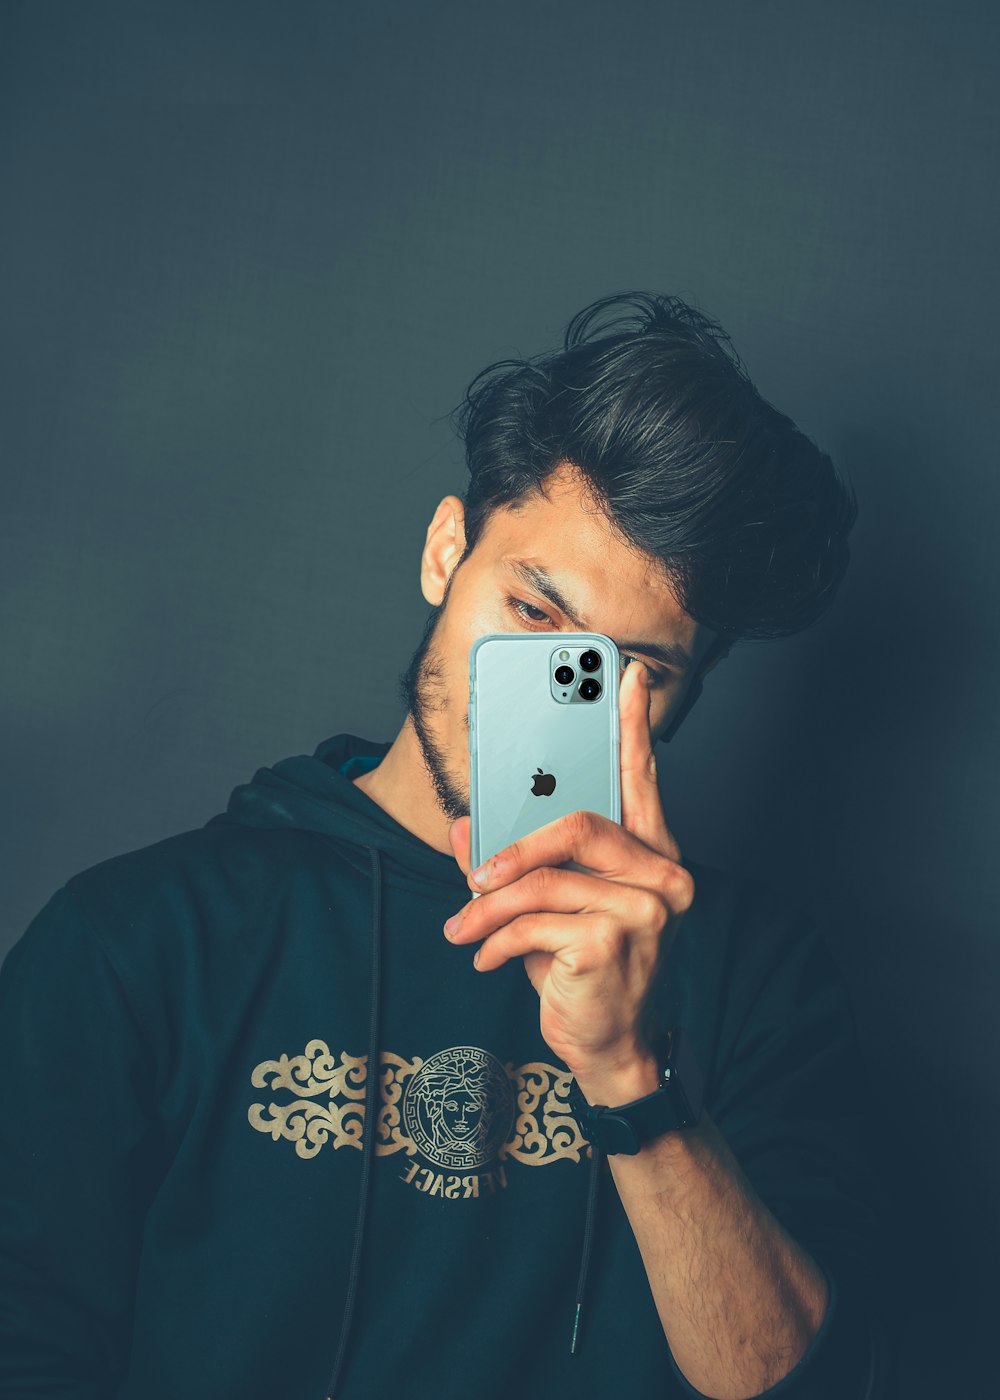 500+ [HQ] Mirror Selfie Pictures | Download Free Images on Unsplash